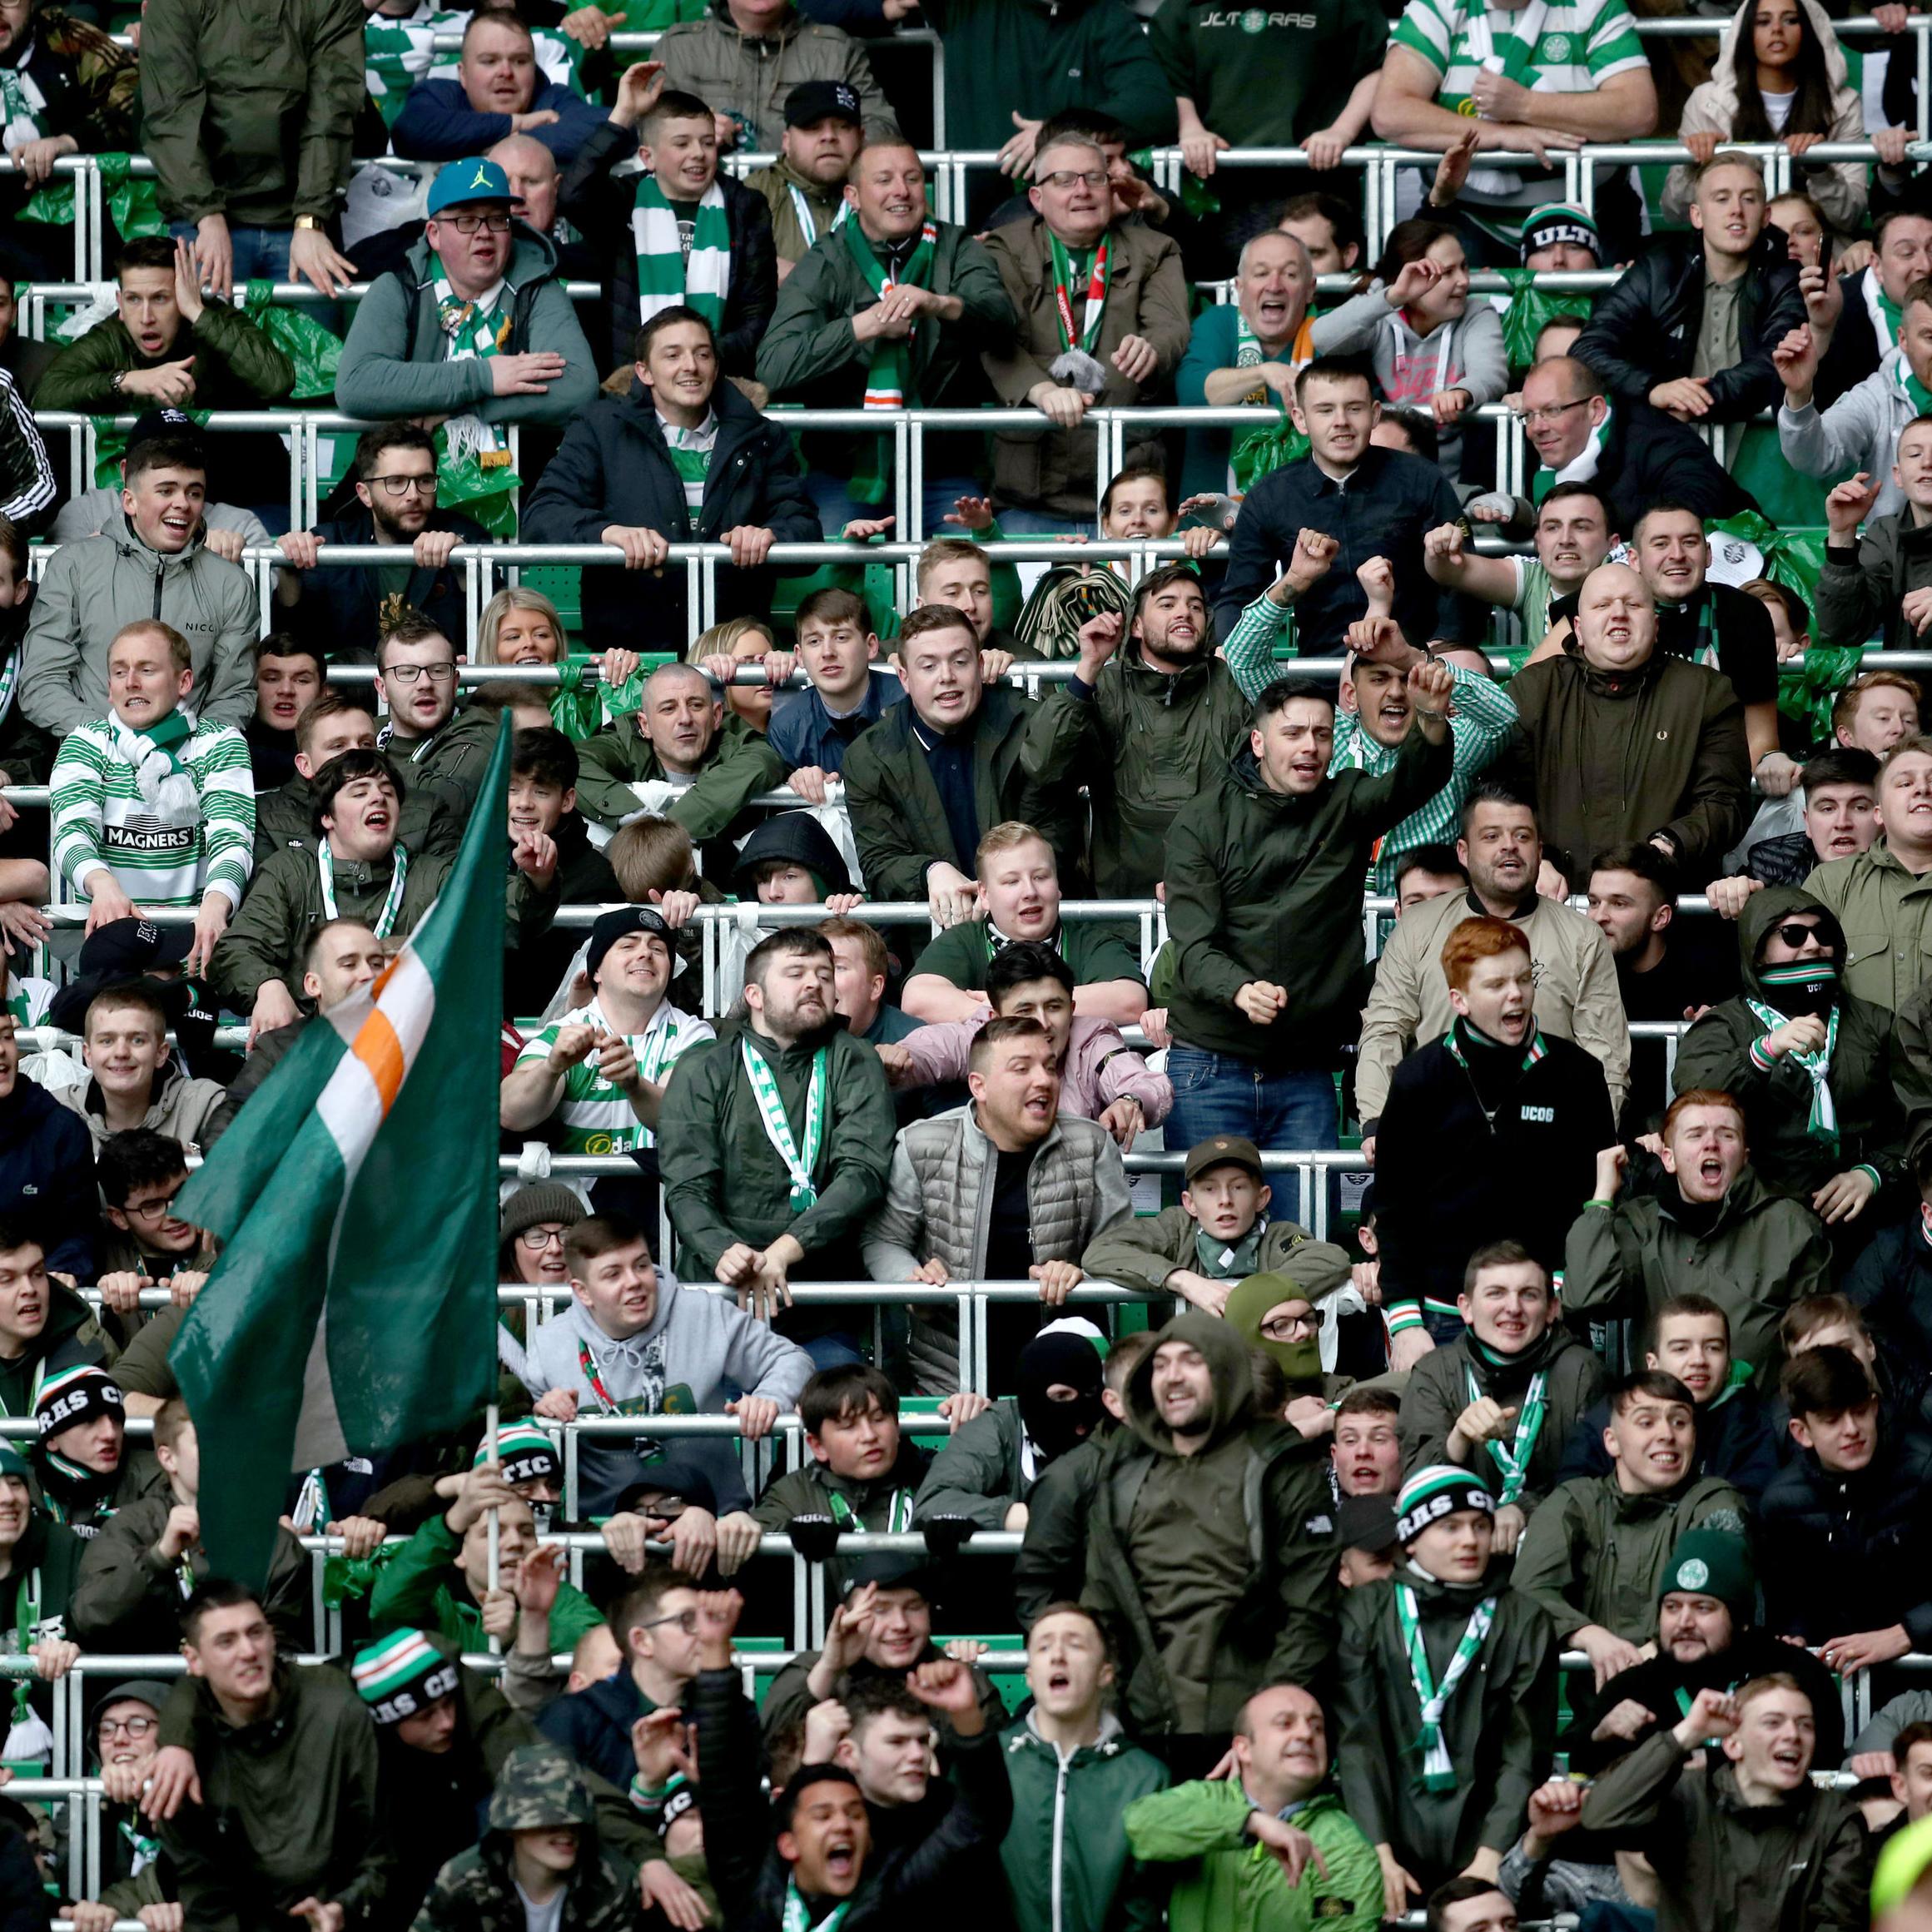 Celtic tell Green Brigade to 'wake up'